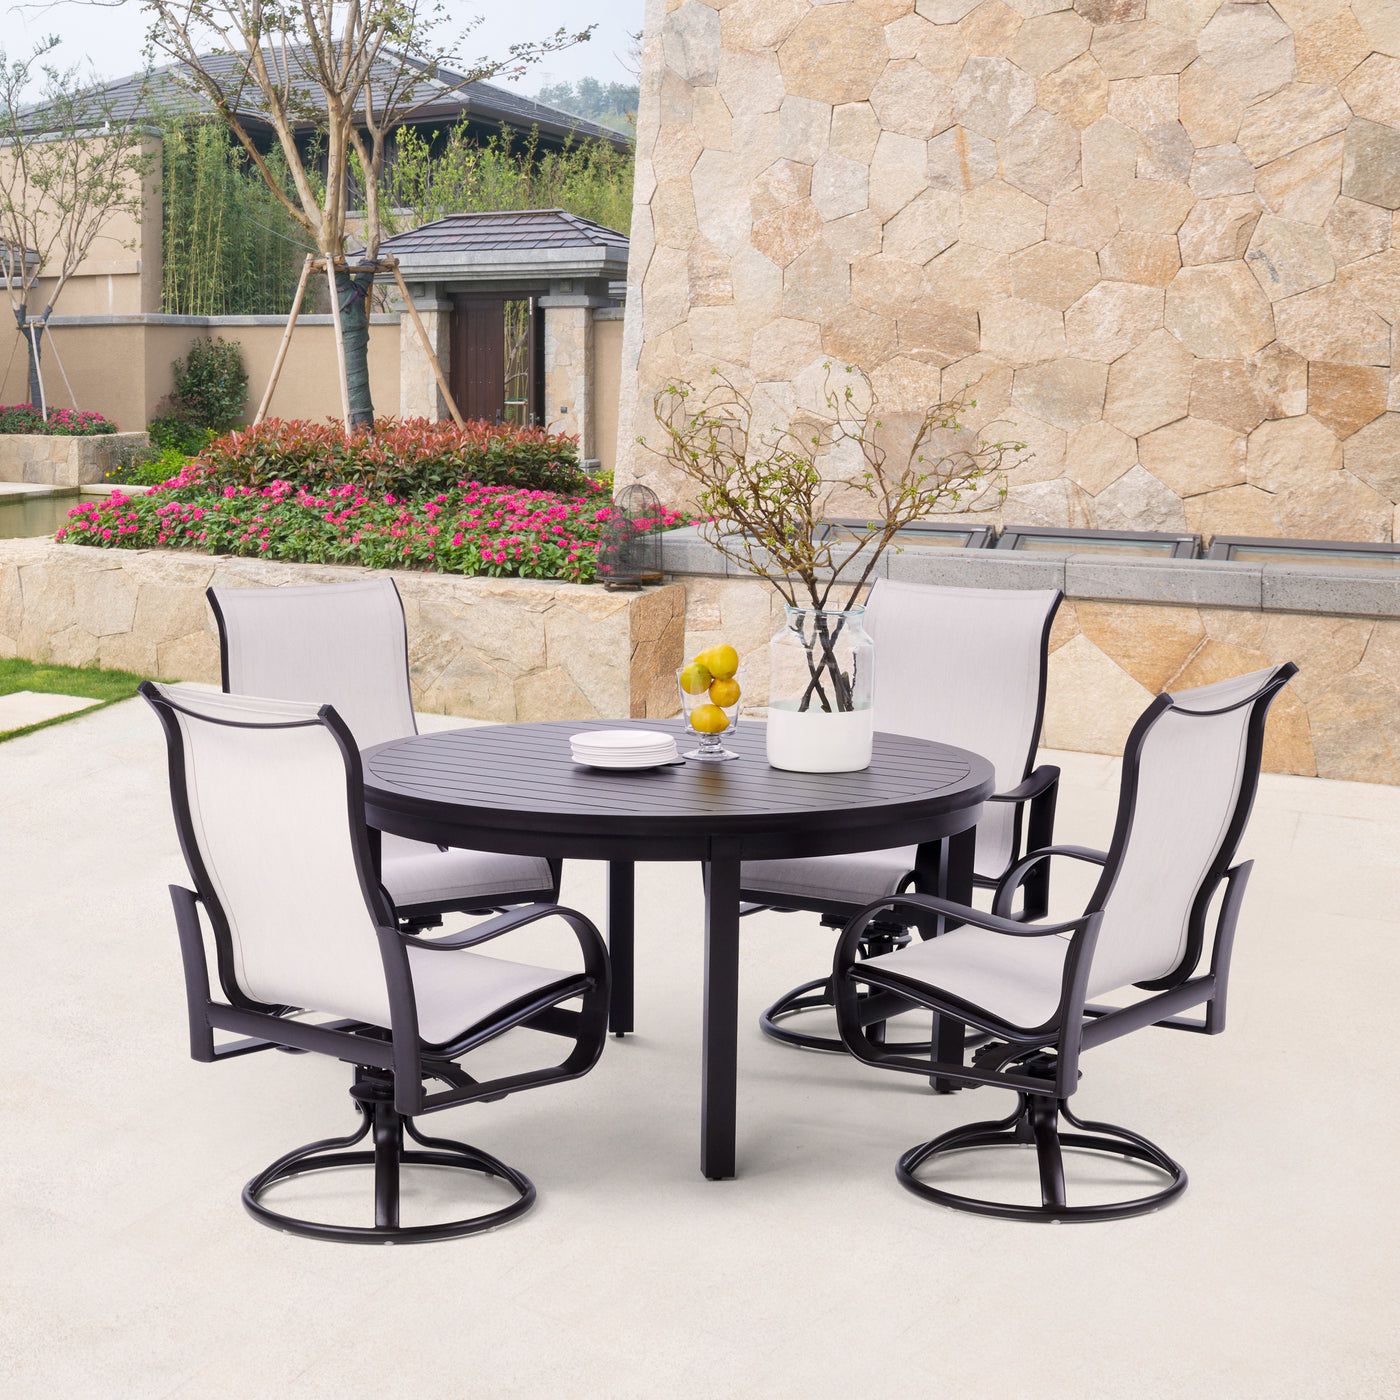 Yardbird Pepin Outdoor Fire Pit Table Set with 4 Sling Chairs Outdoor Furniture